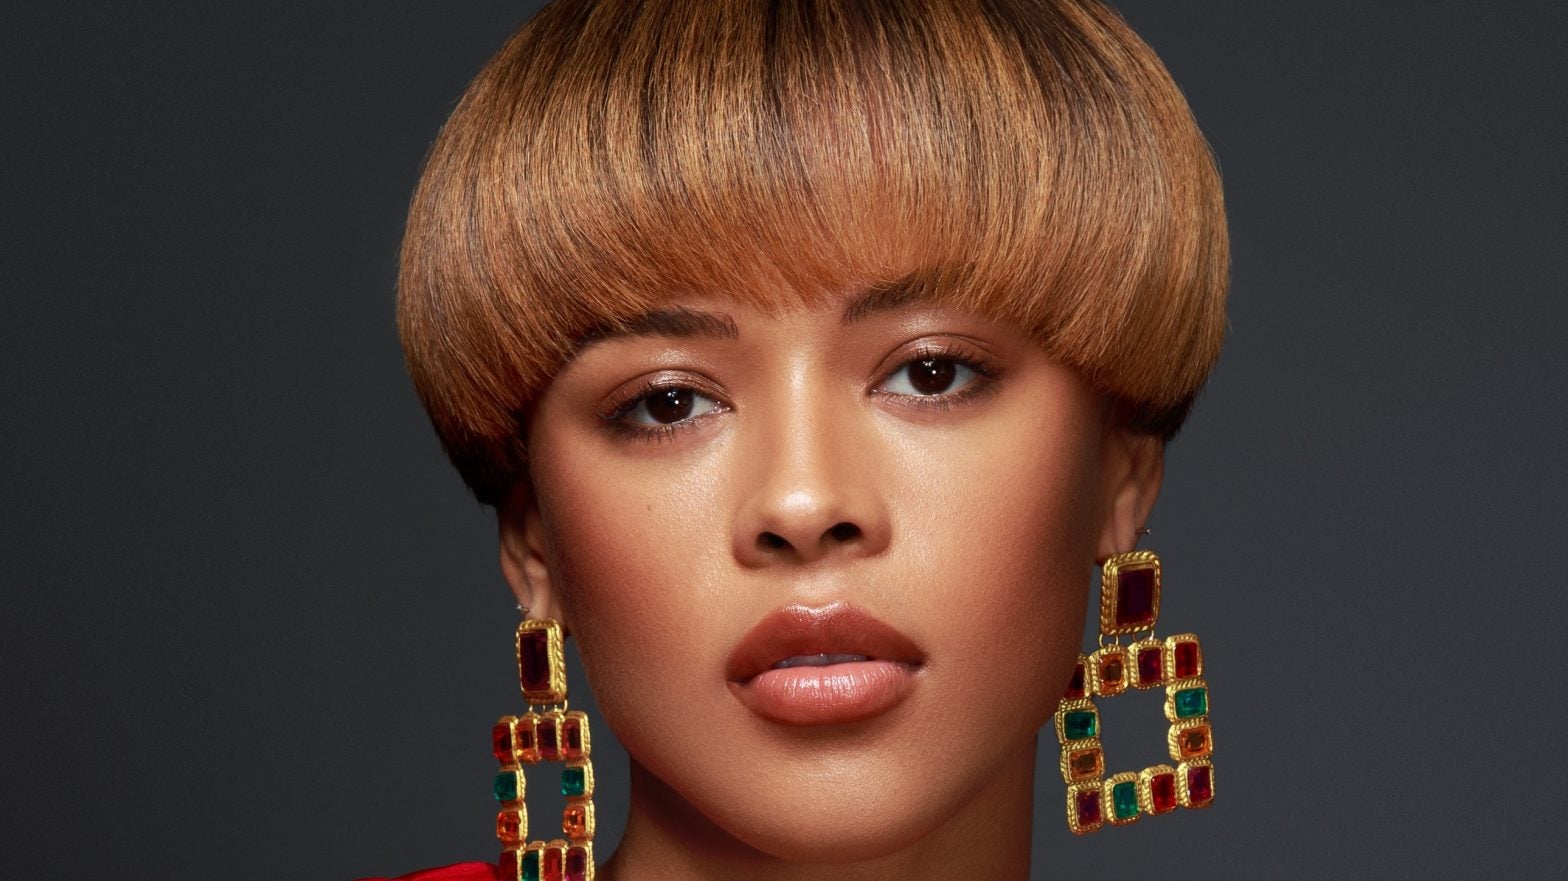 From 'Empire' To 'Envy:' Serayah McNeill On Her Growth In the Industry